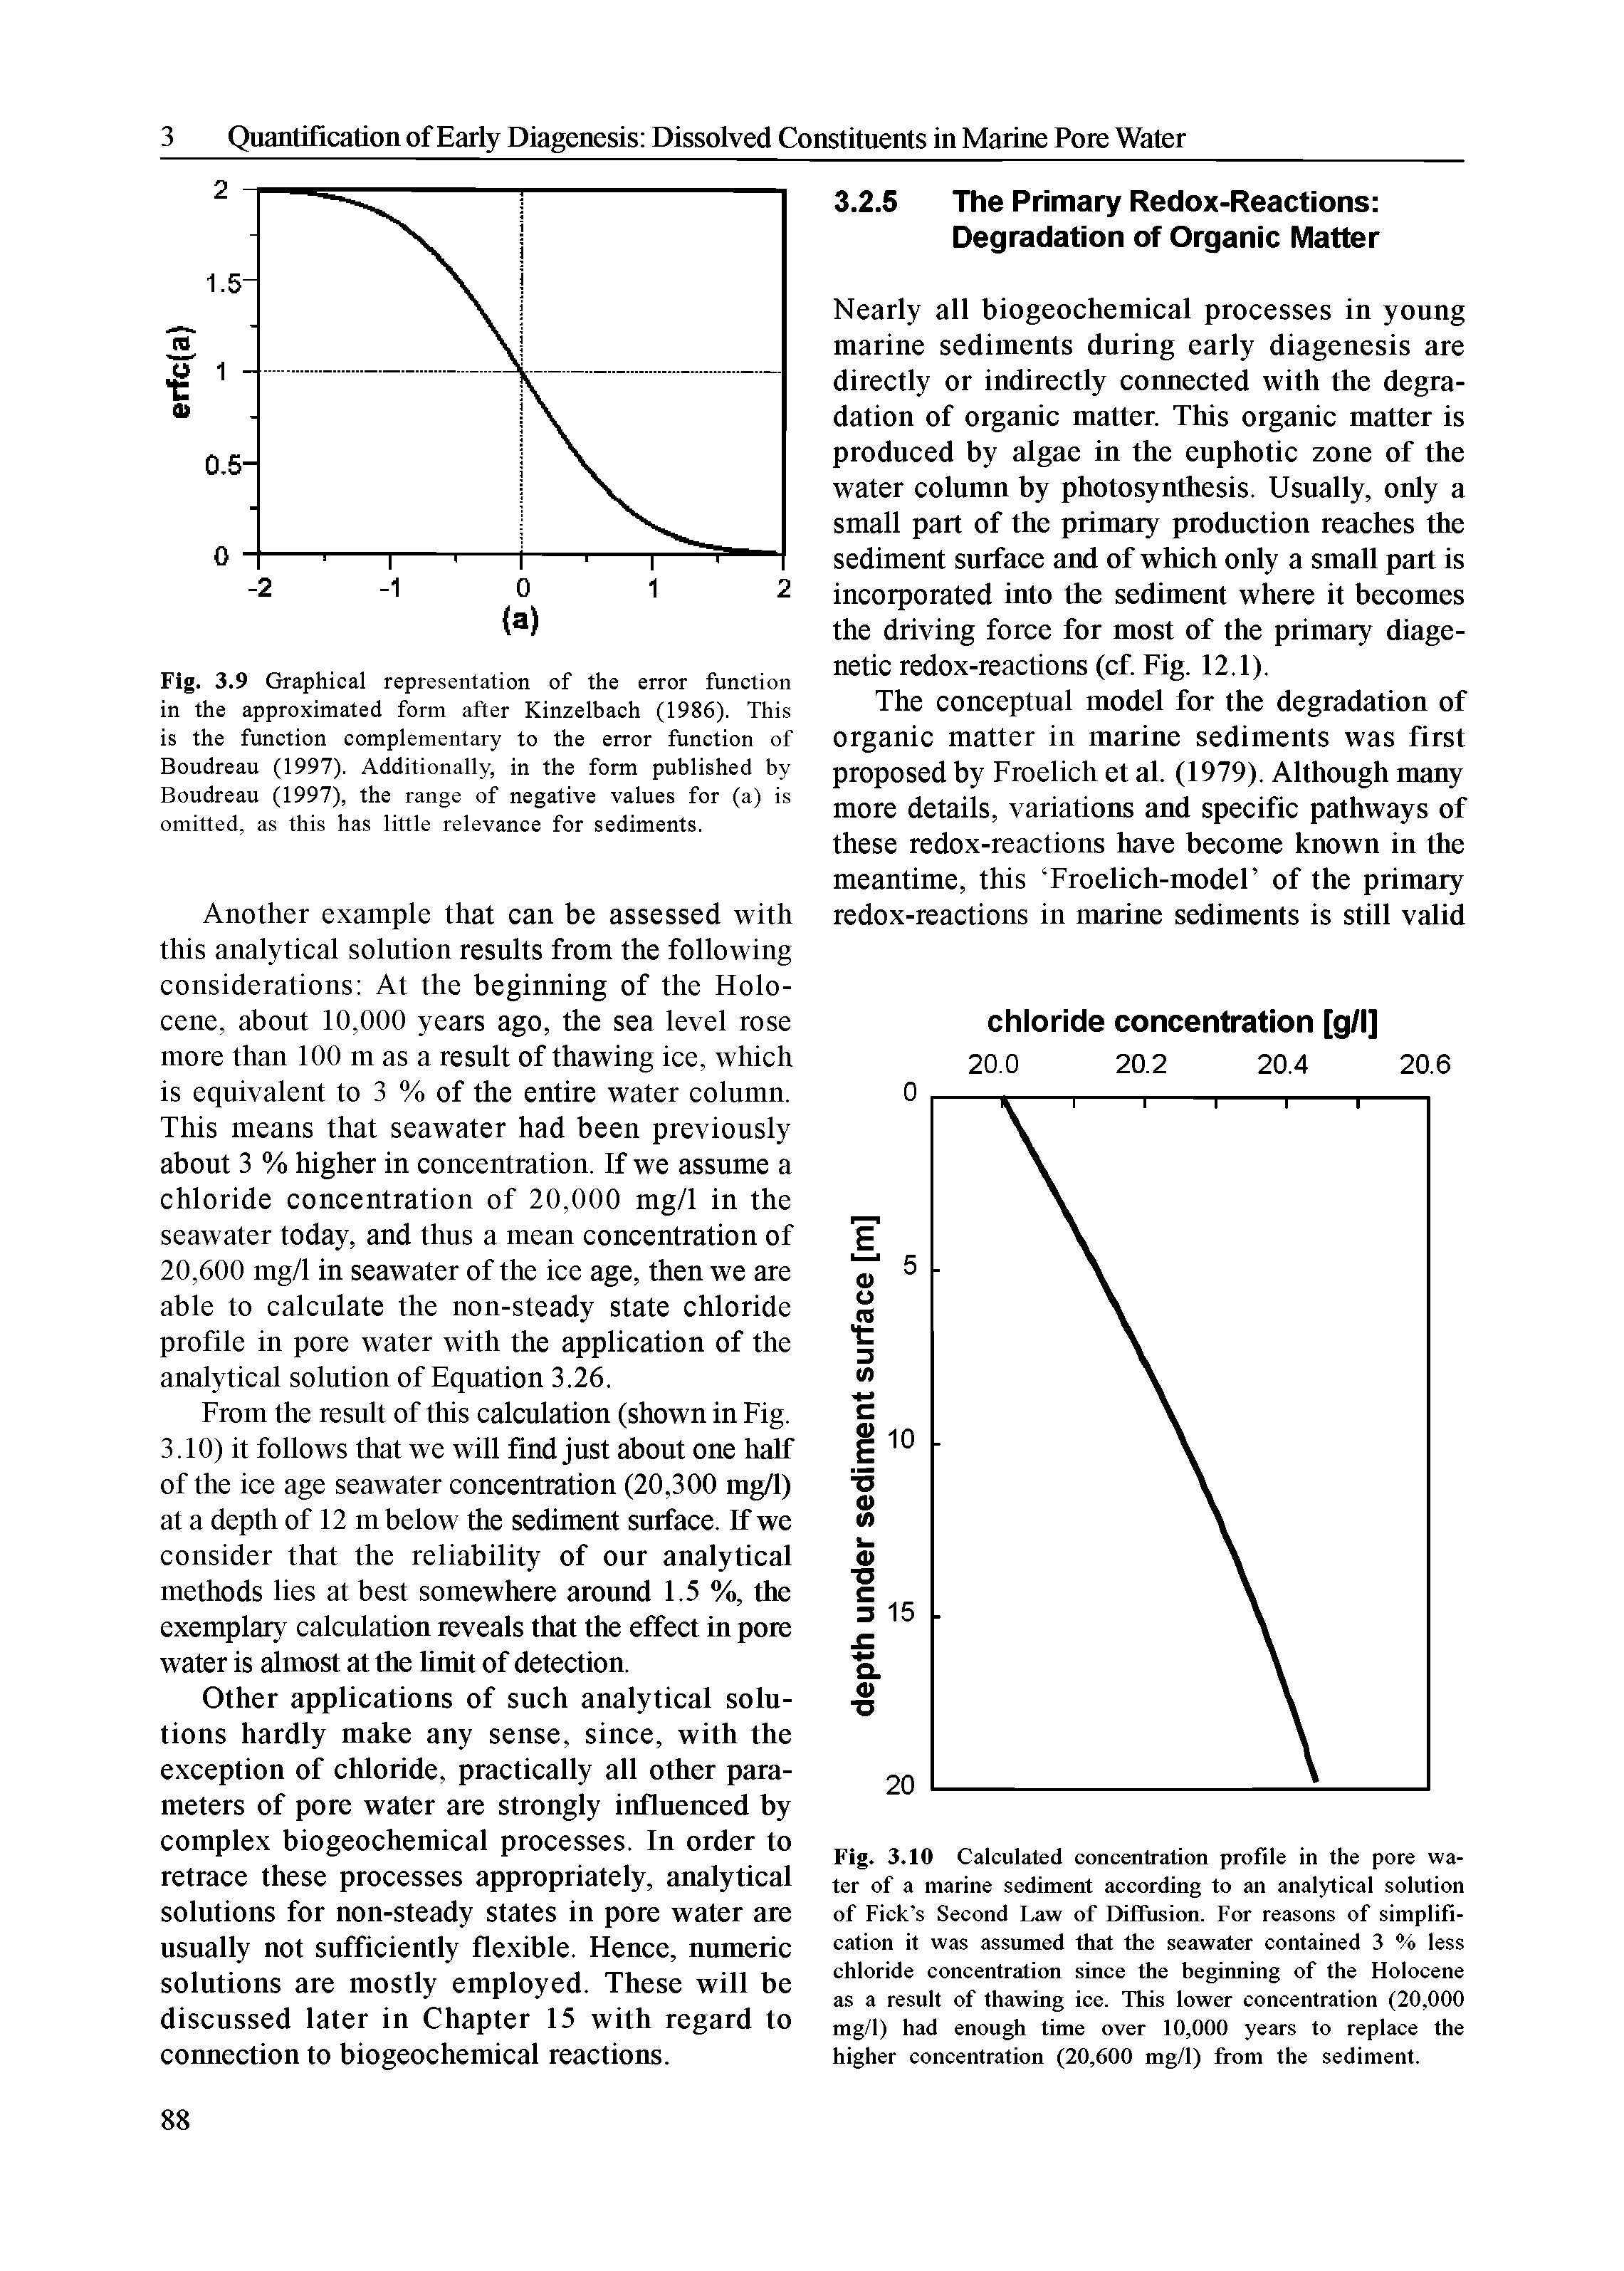 Fig. 3.9 Graphical representation of the error function in the approximated form after Kinzelhach (1986). This is the function complementary to the error function of Boudreau (1997). Additionally, in the form published by Boudreau (1997), the range of negative values for (a) is omitted, as this has little relevance for sediments.